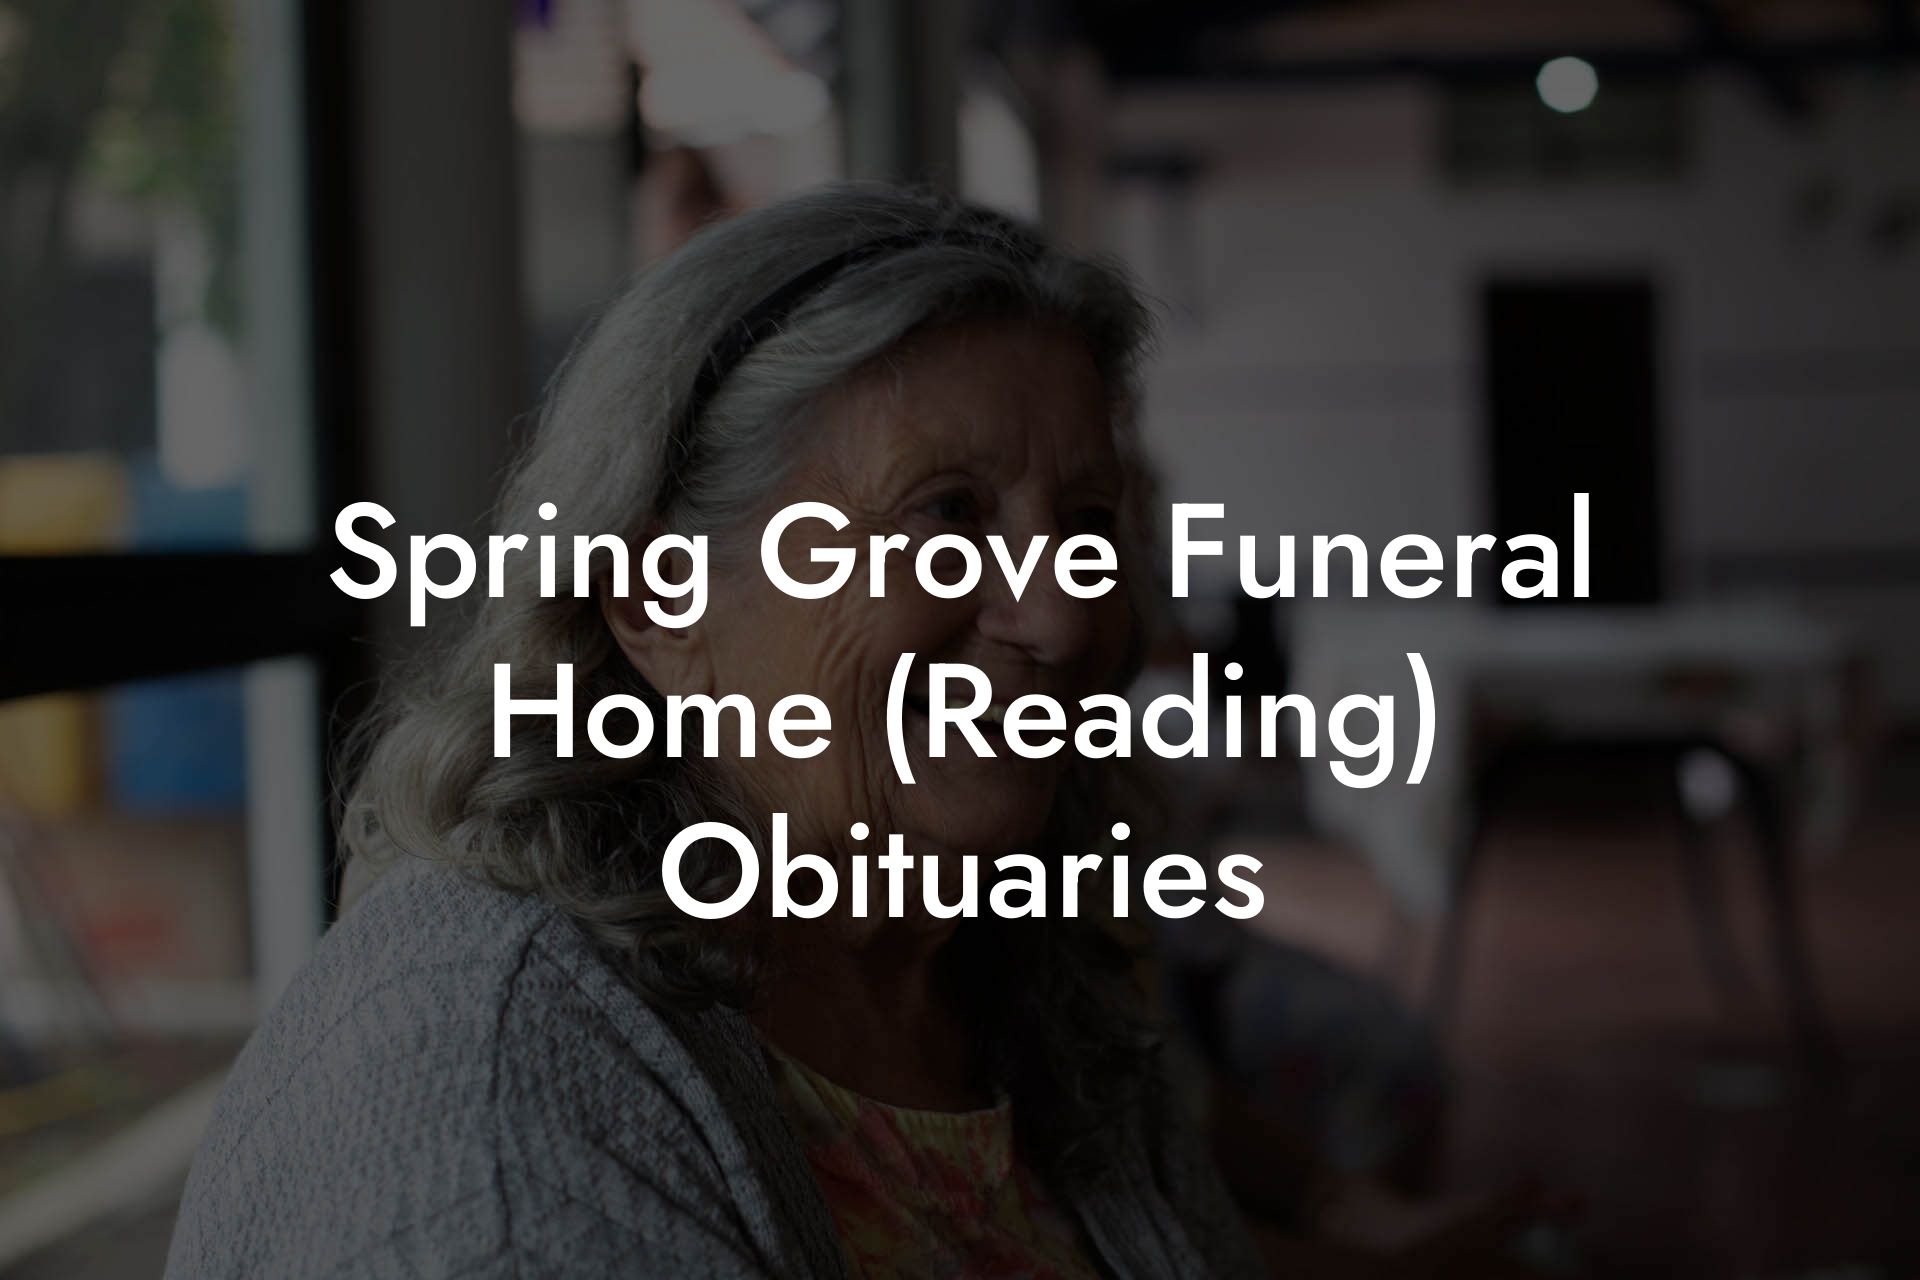 Spring Grove Funeral Home (Reading) Obituaries